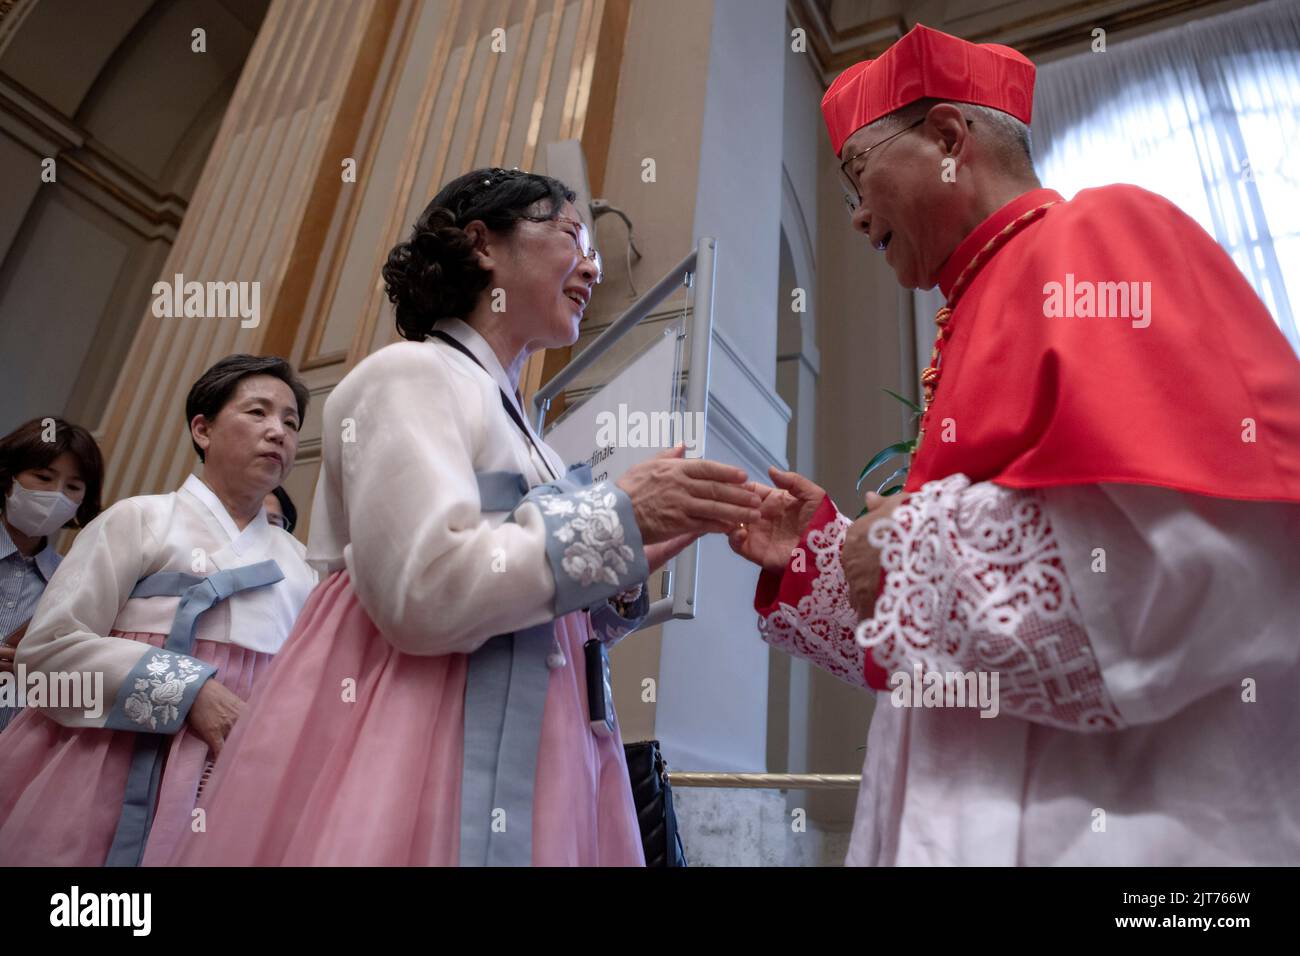 Vatican City, Vatican, 27 August 2022.  The newly elected cardinal Lazzaro You Heung Sik greets g the faithful  during courtesy visits to the Vatican after a consistory inside St. Peter's Basilica. Credit: Maria Grazia Picciarella/Alamy Live News Stock Photo